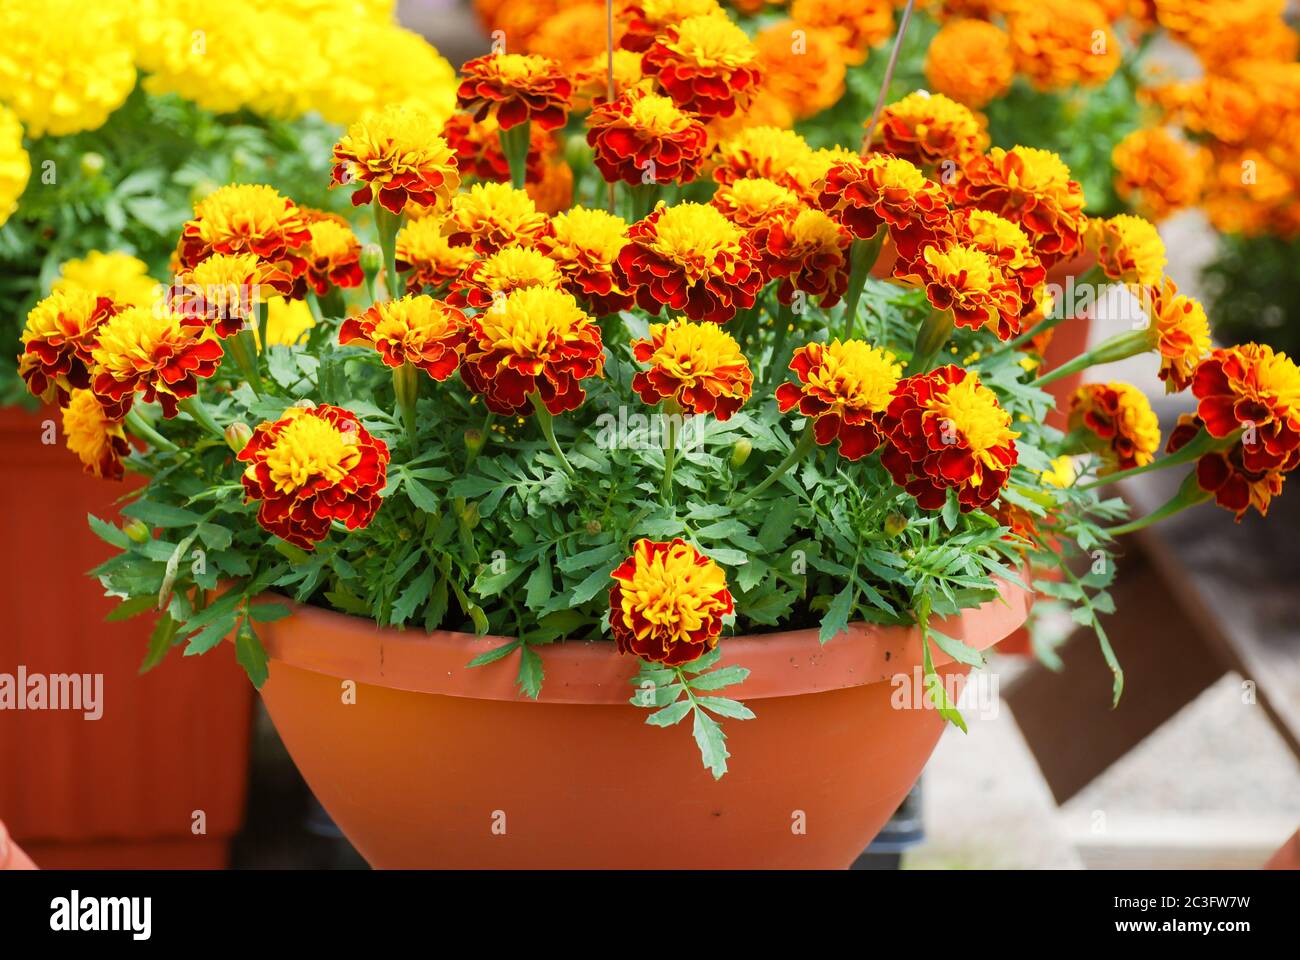 Tagetes patula french marigold in bloom, orange yellow flowers, green leaves Stock Photo